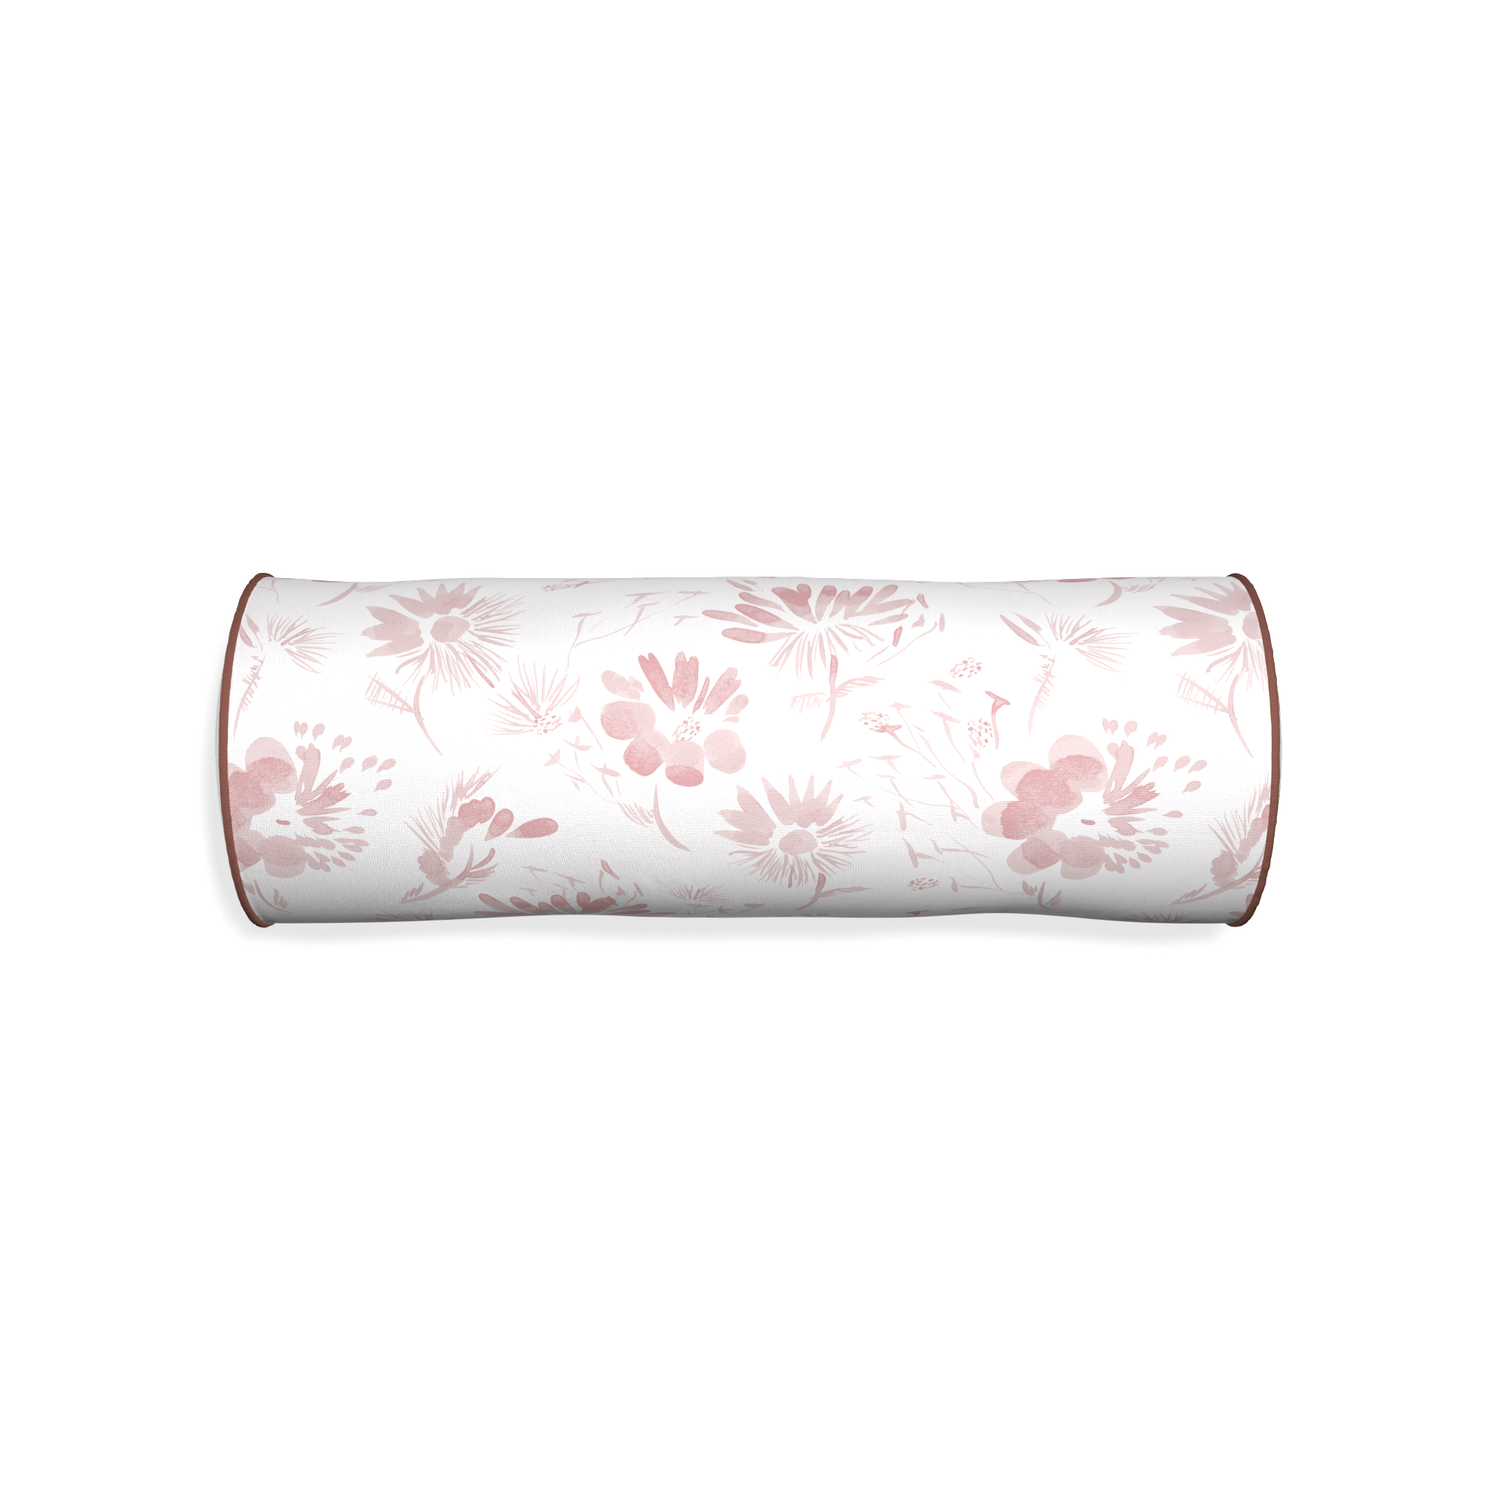 Bolster blake custom pink floralpillow with w piping on white background